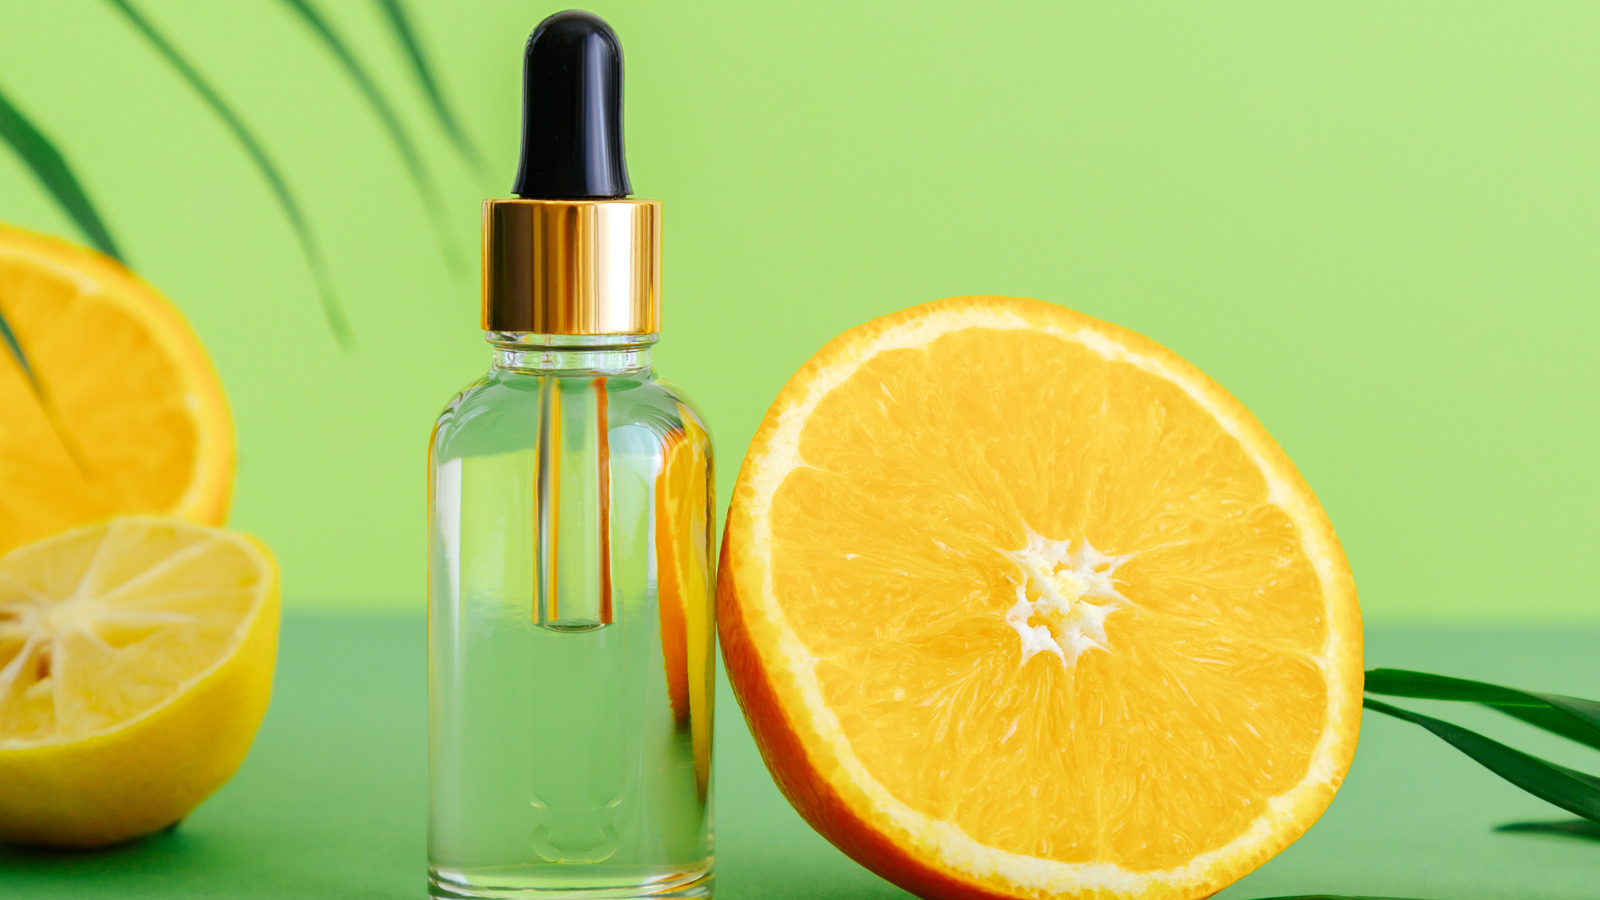 What You Need To Know About Incorporating Citric Acid Into Your Skincare Routine